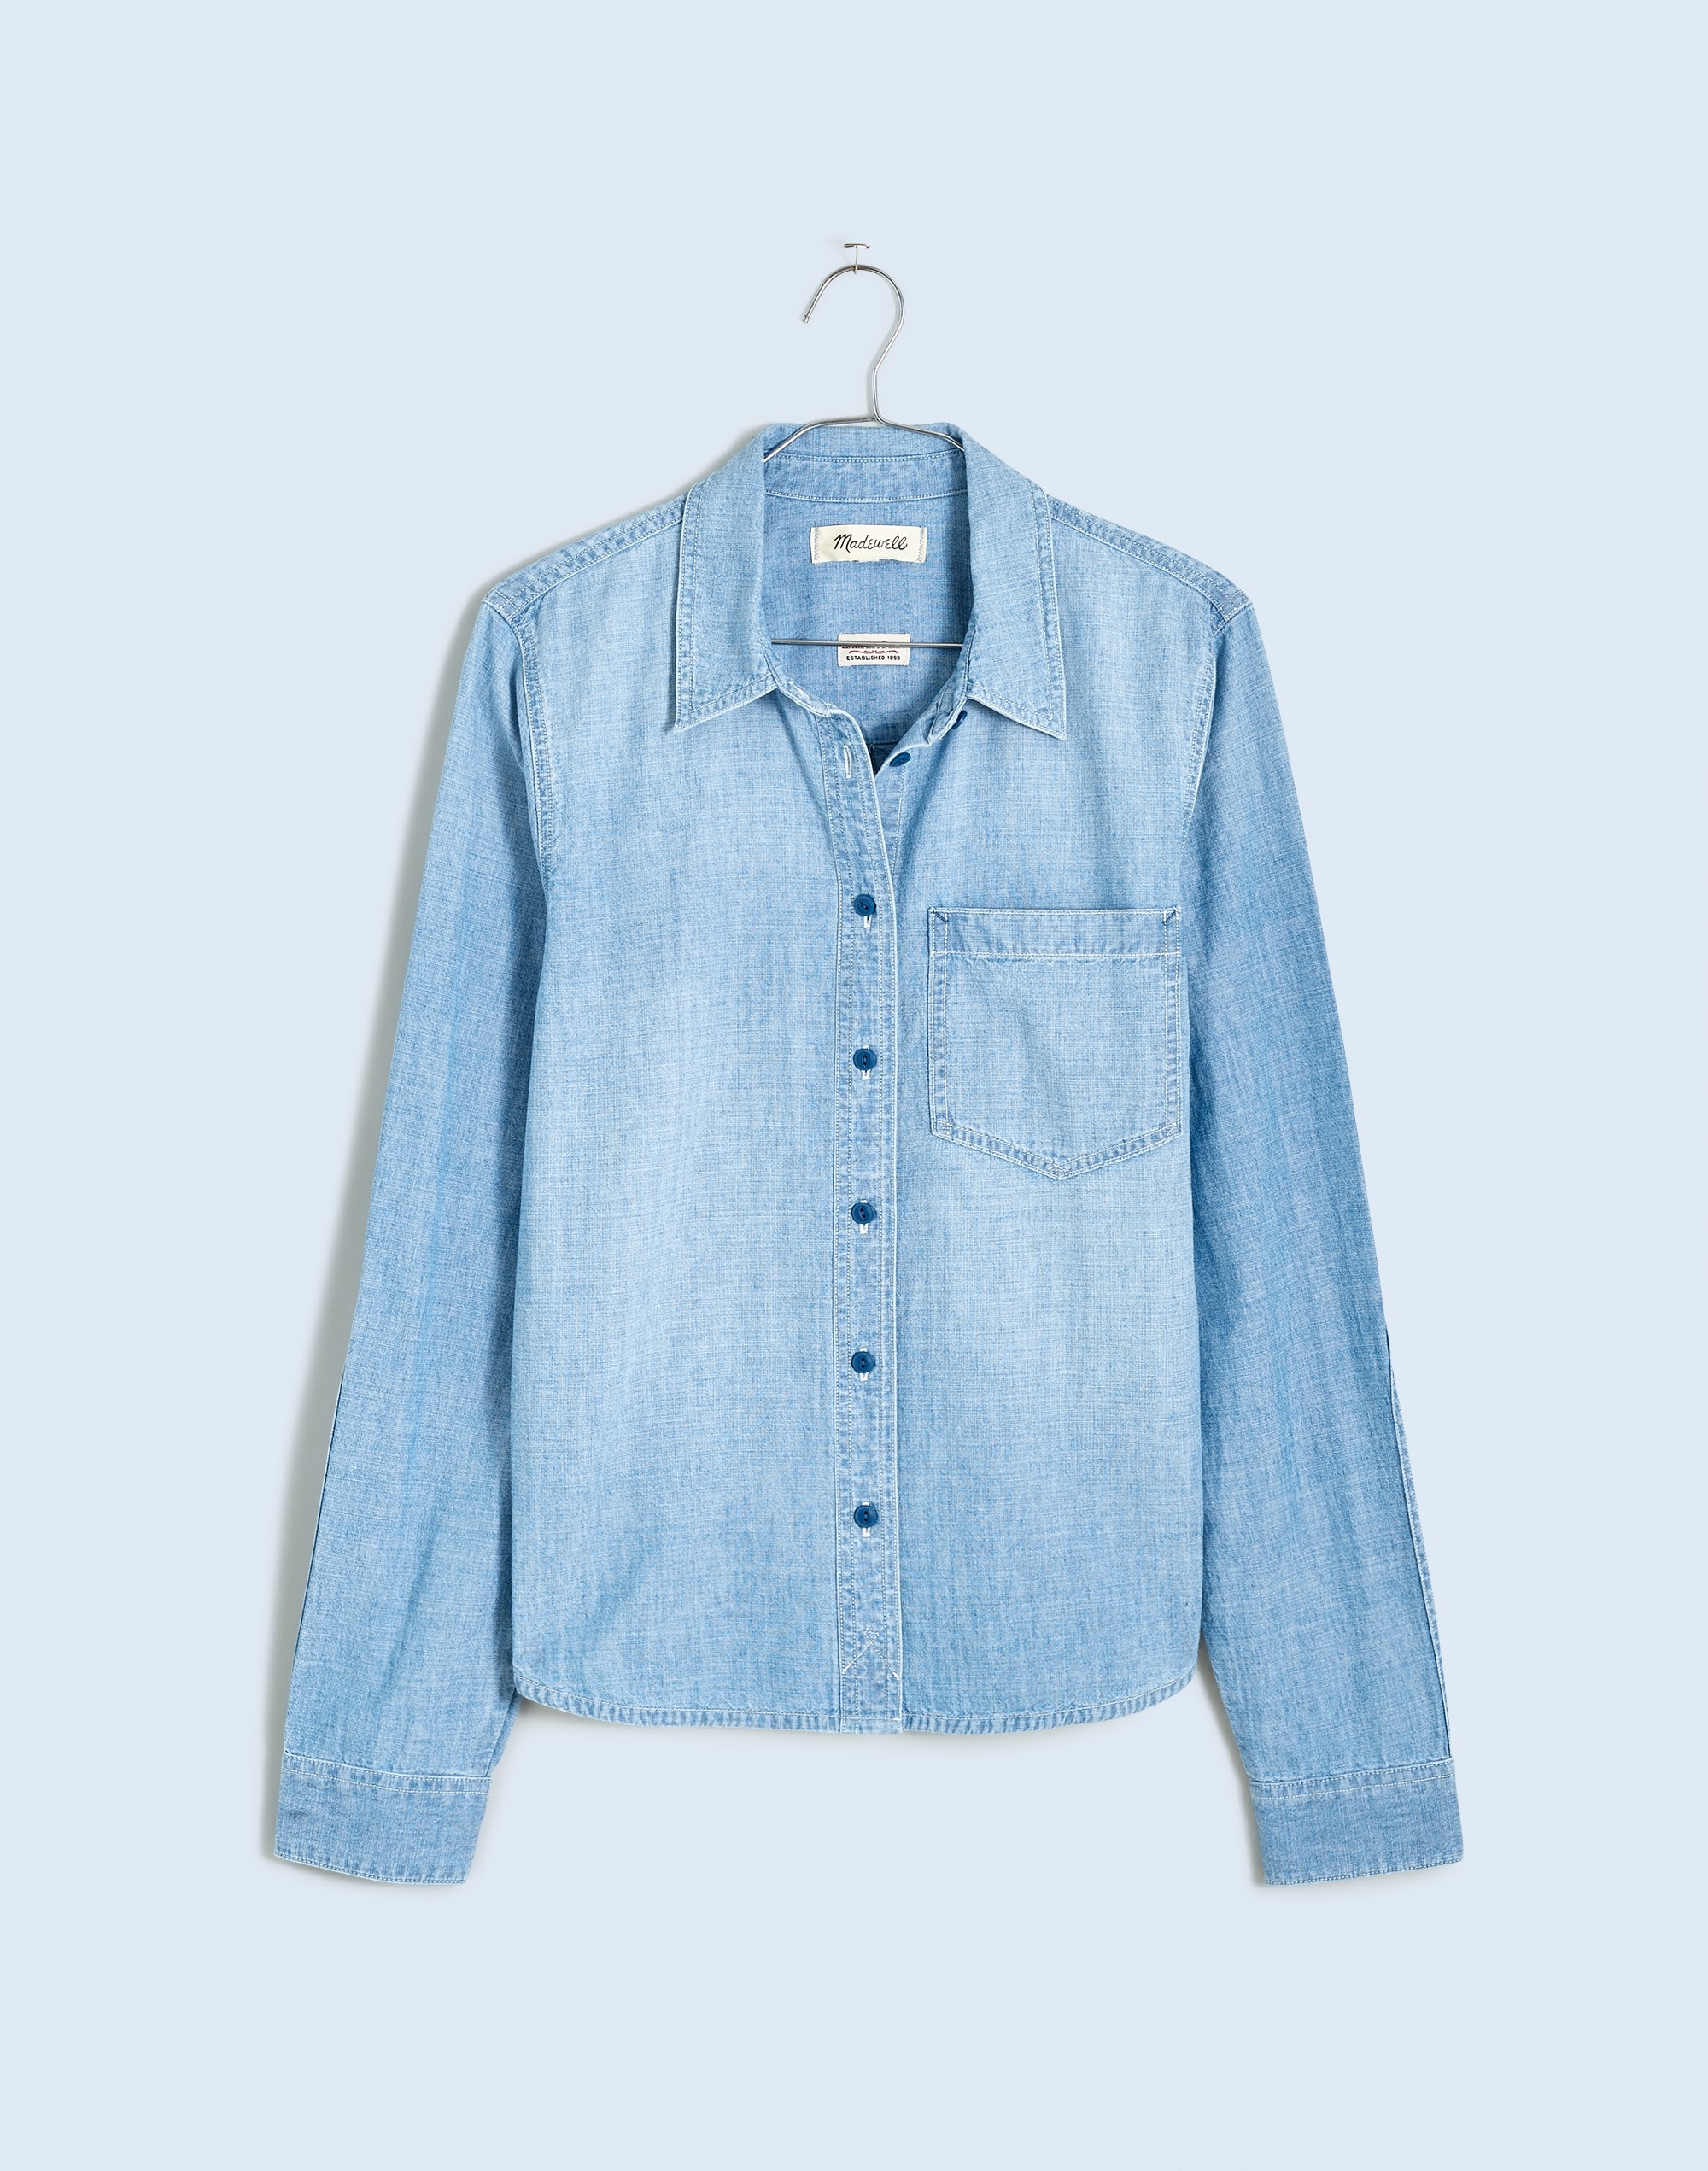 Madewell x Kaihara Chambray Button-Up Shirt in Elmfield Wash